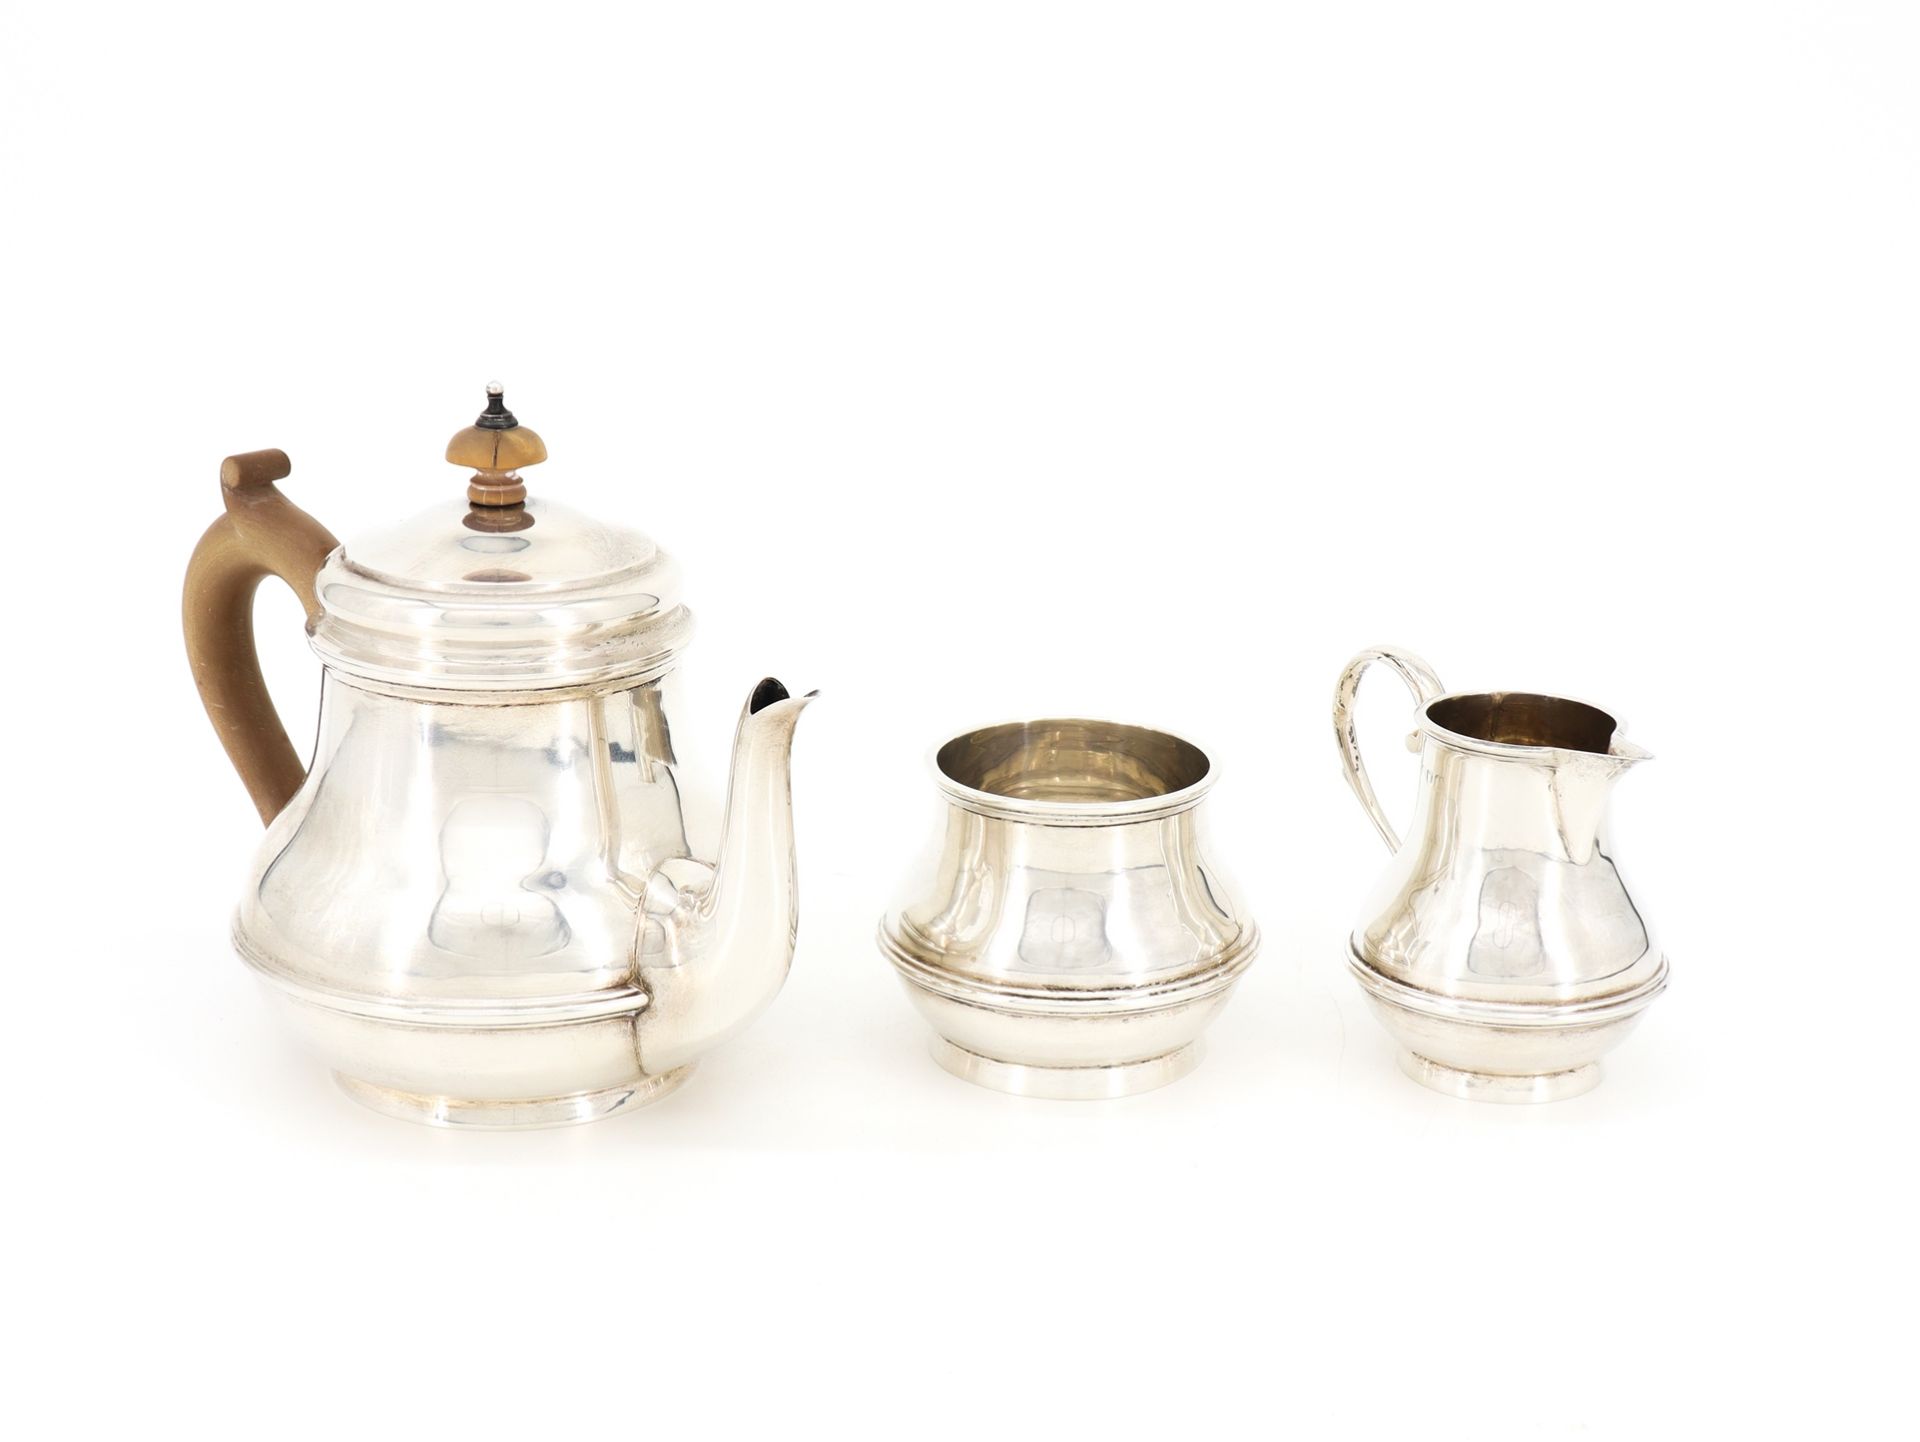 Tea service, 3 pieces, 925 sterling silver, England, London, 1902